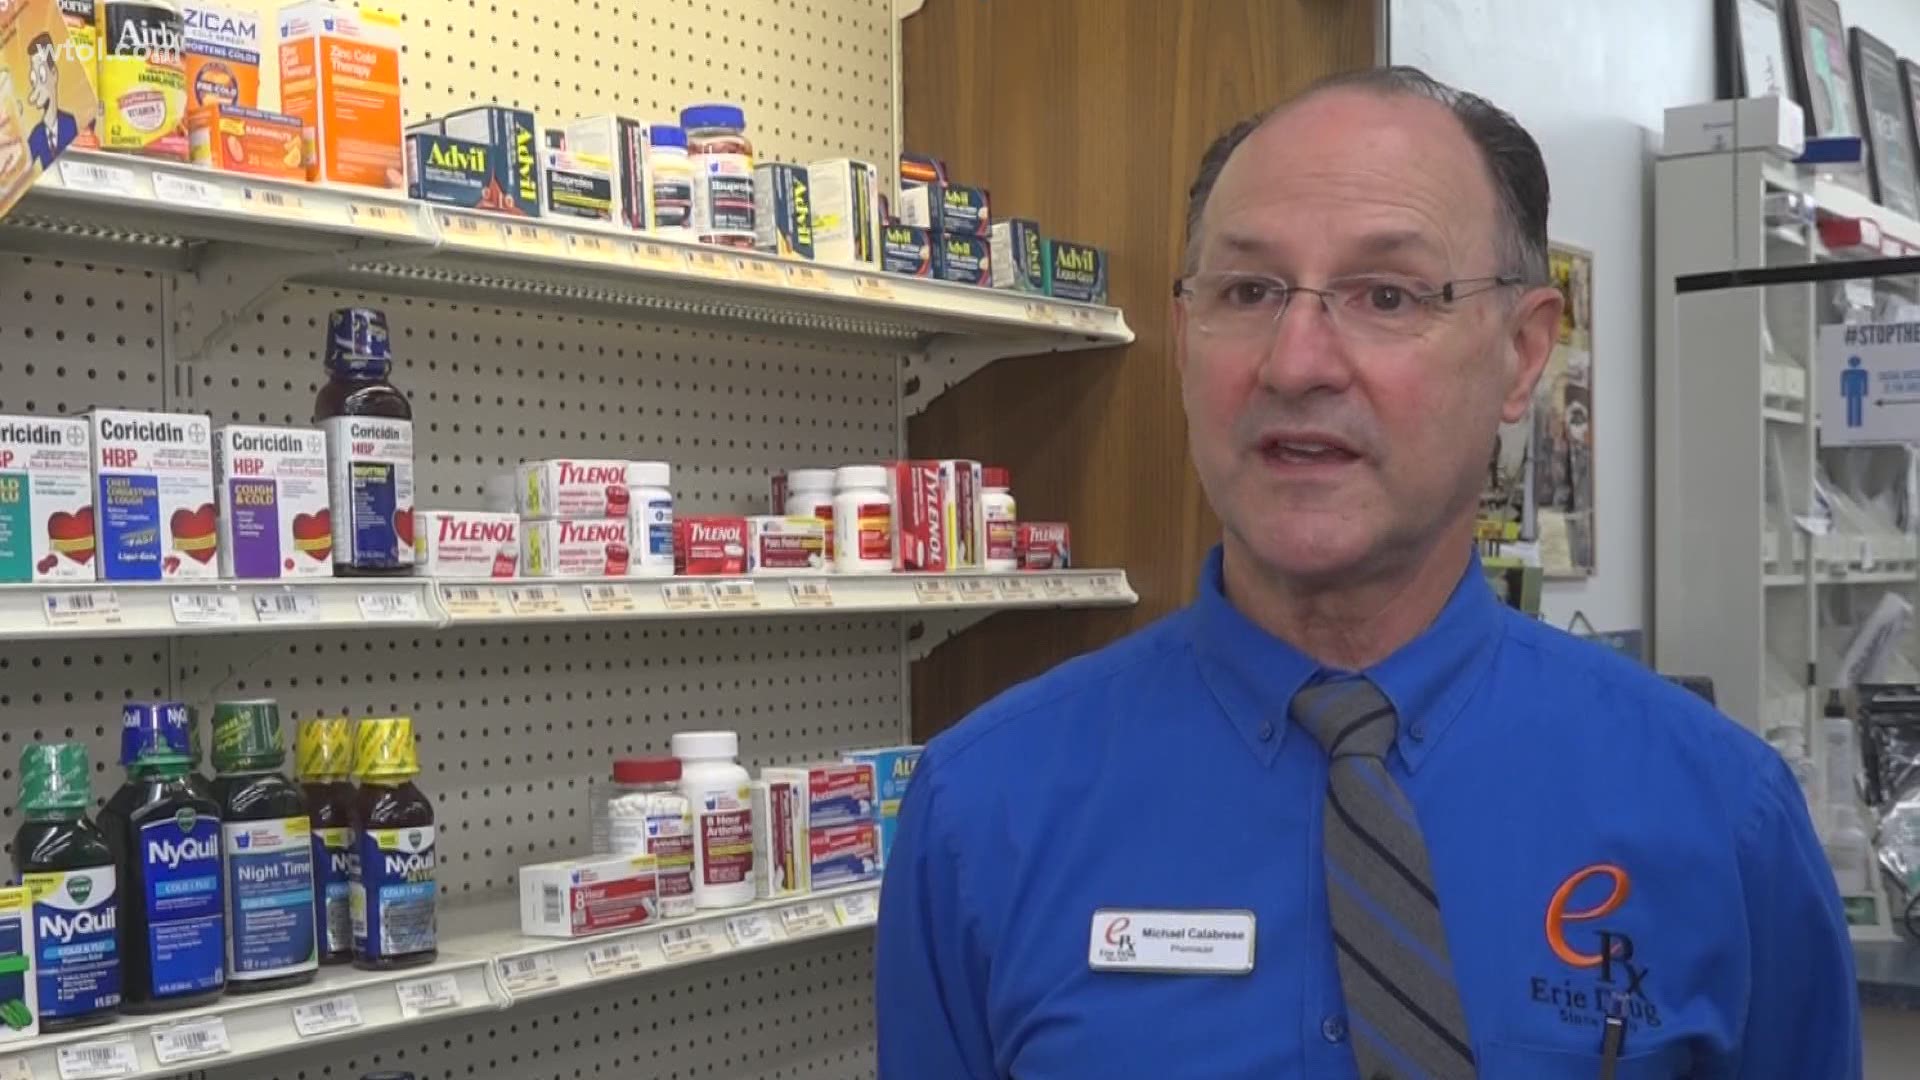 Locally owned pharmacies are fielding lots of calls.